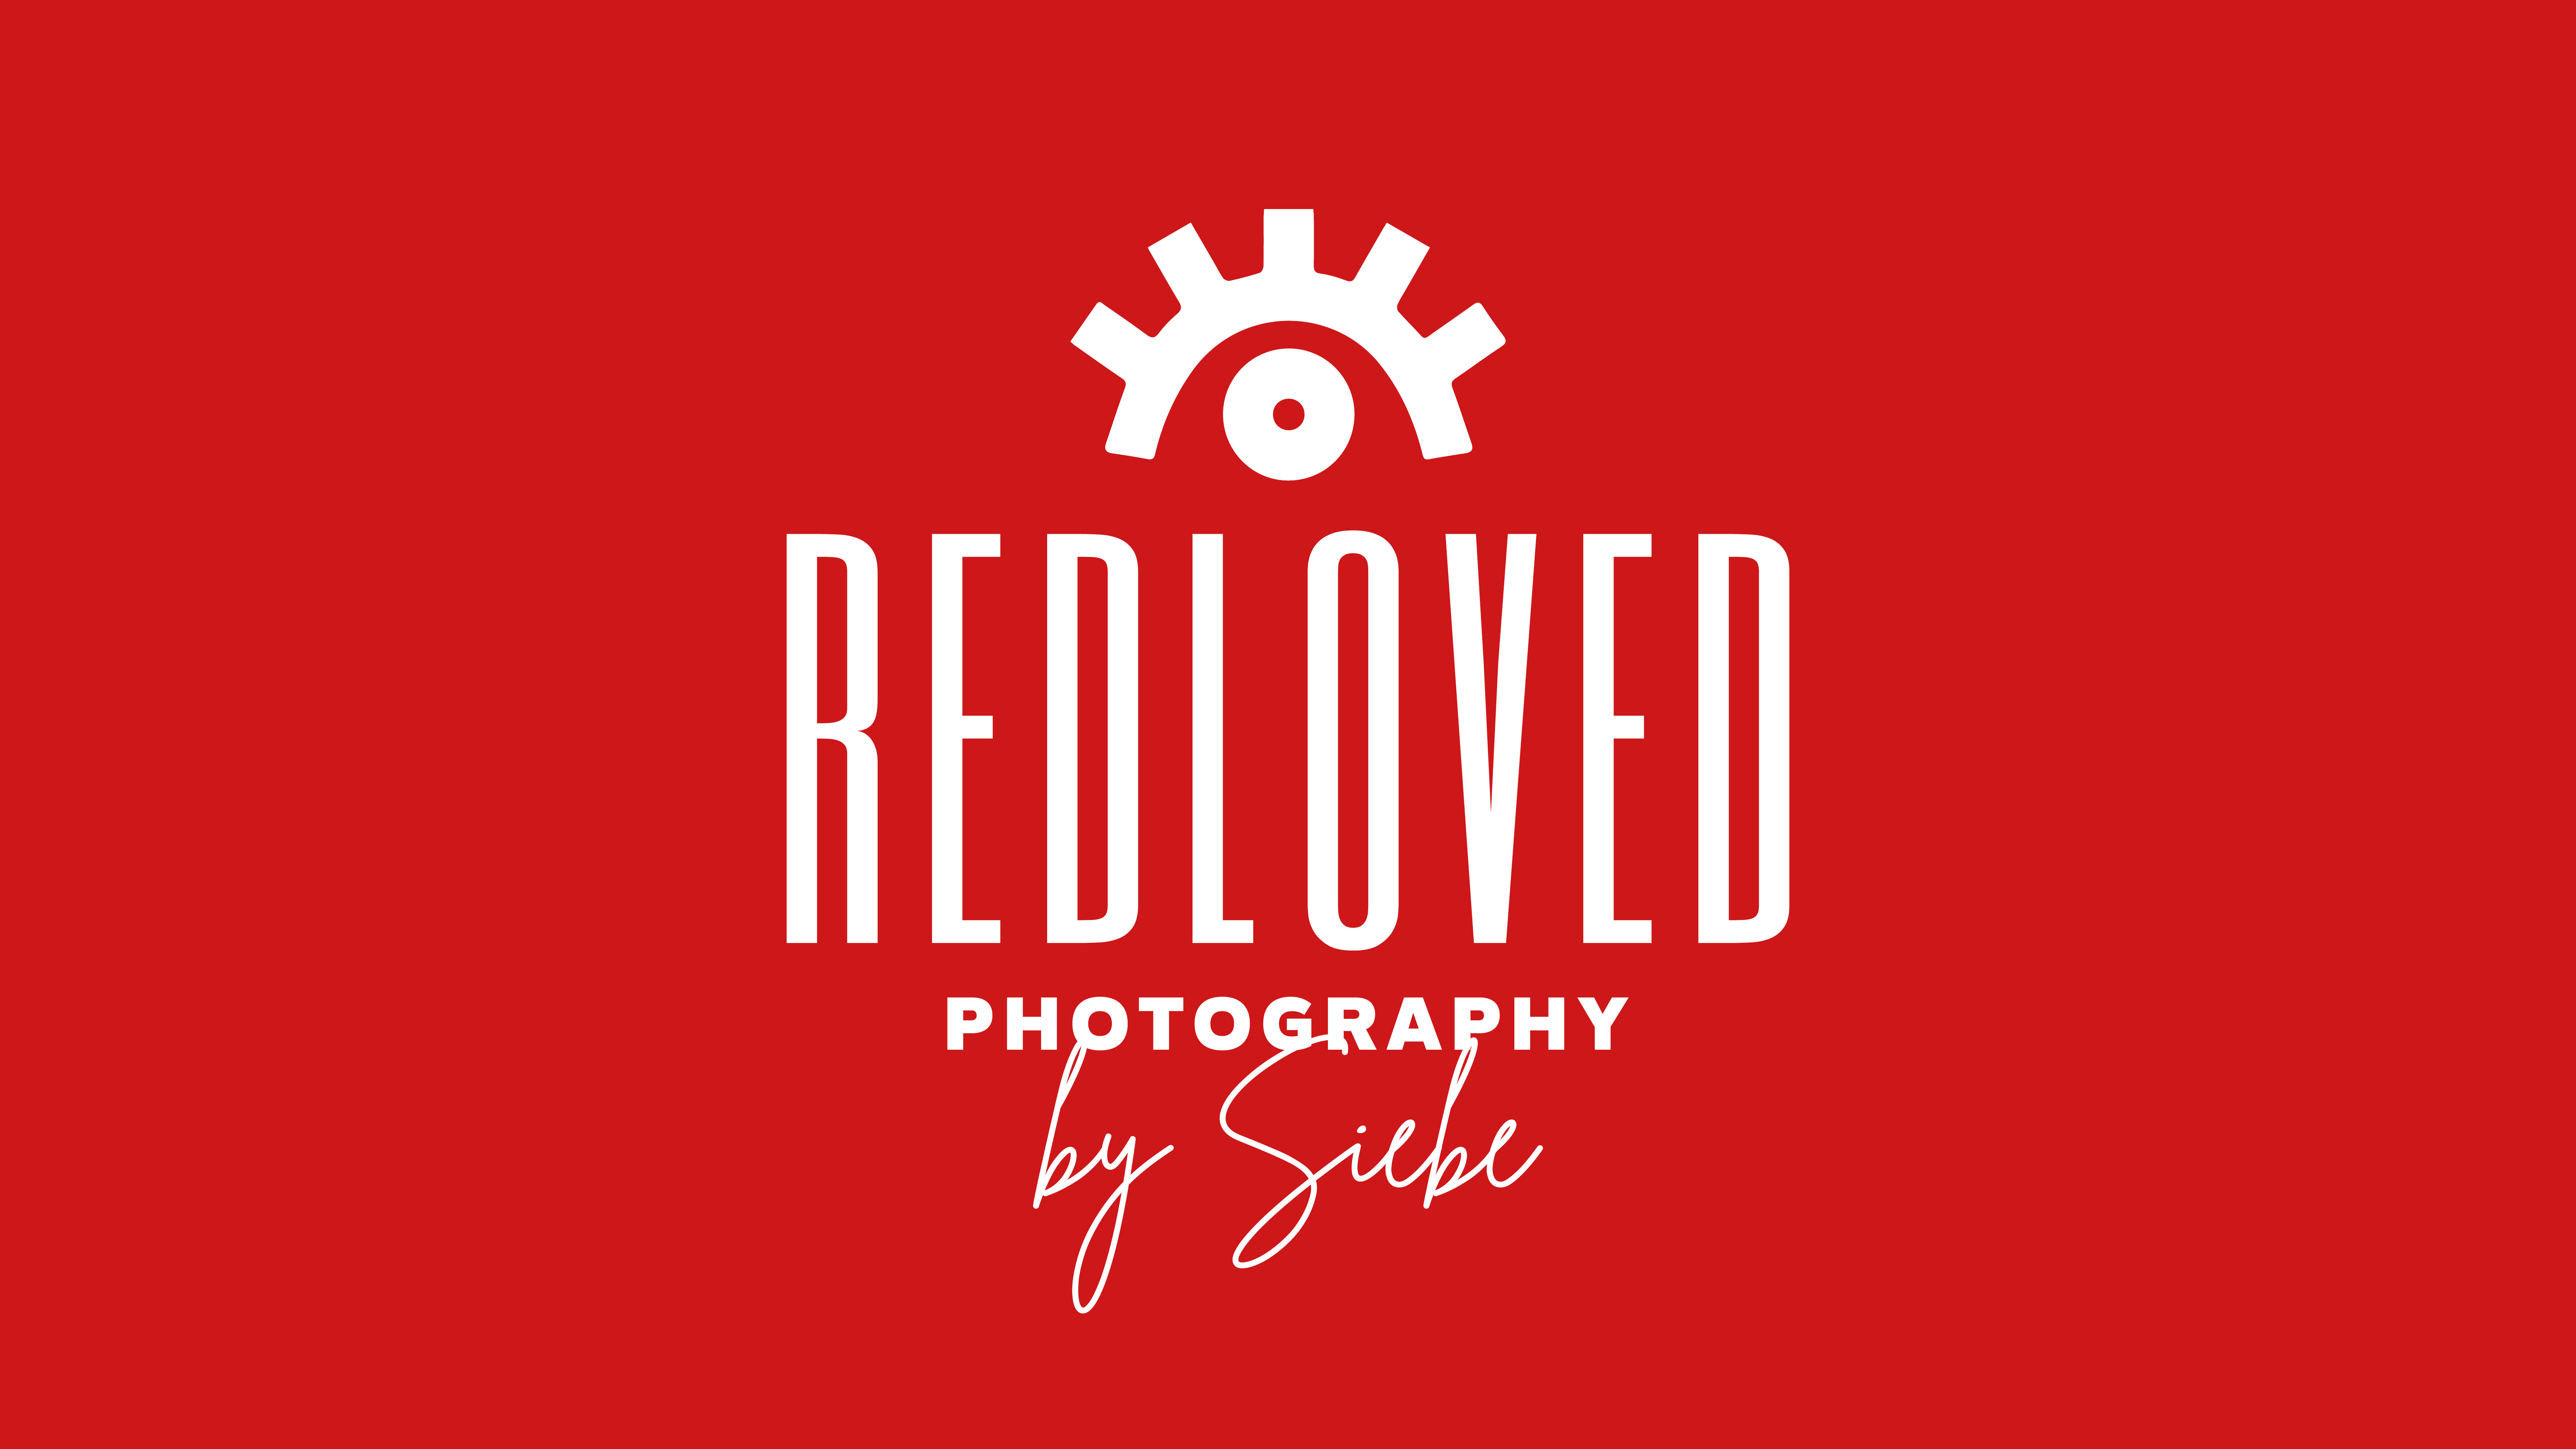 RedLoved Photography by Siebe https://www.redloved.be/